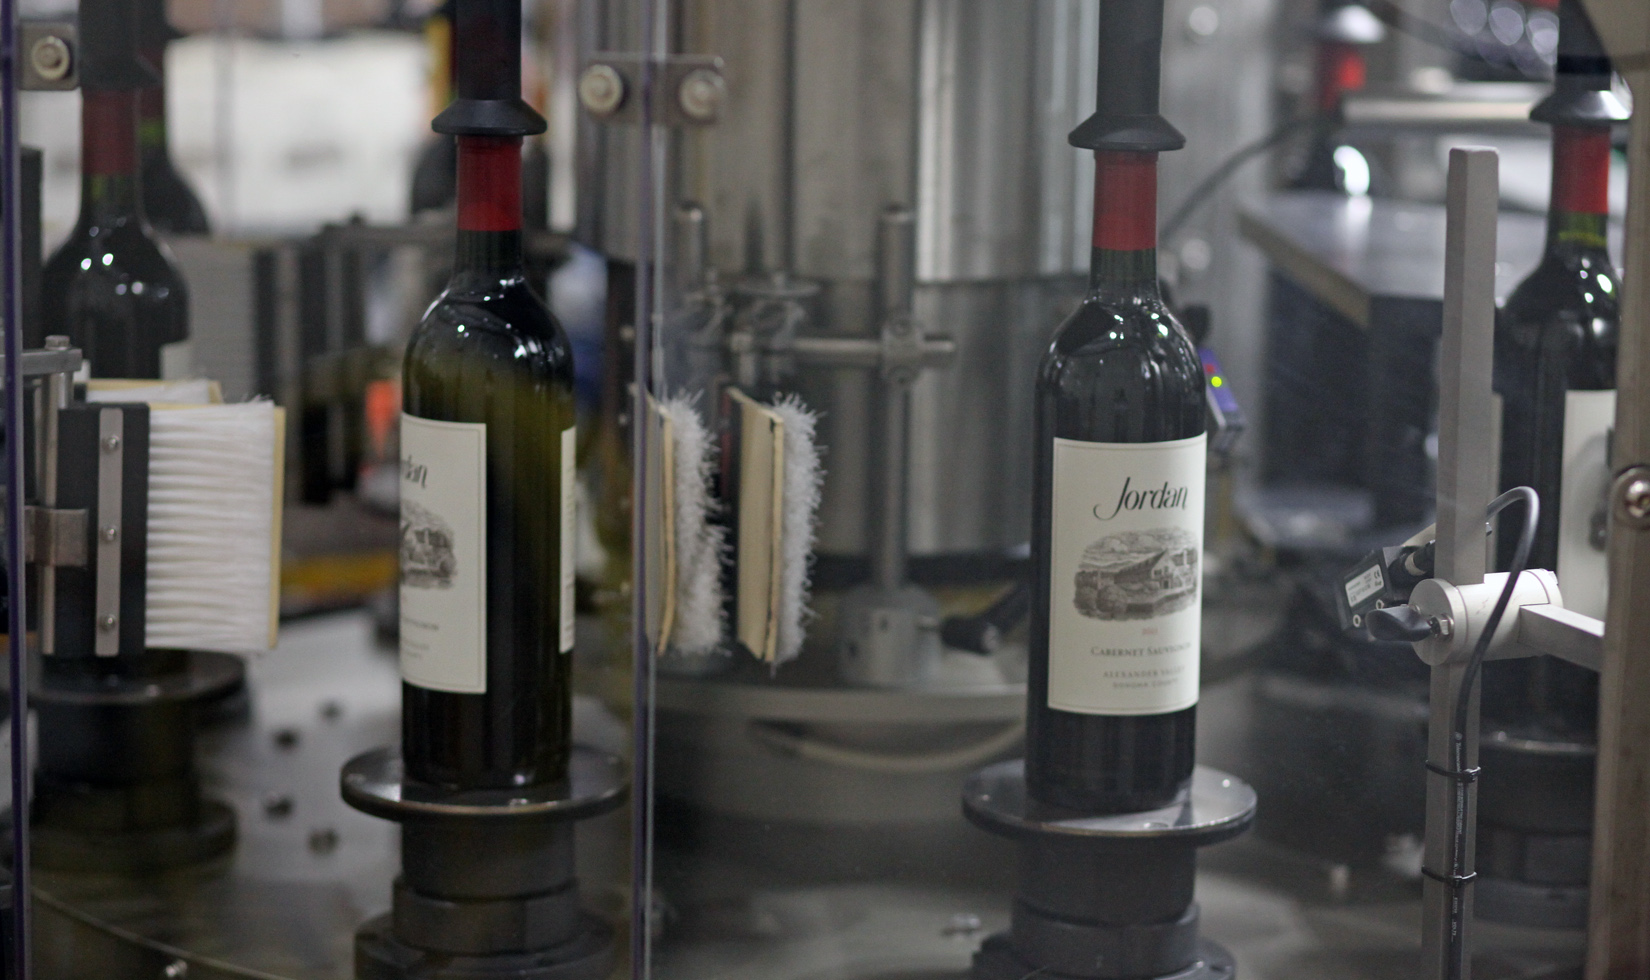 Labels being applied to bottles of Jordan Cabernet Sauvignon on the wine line.